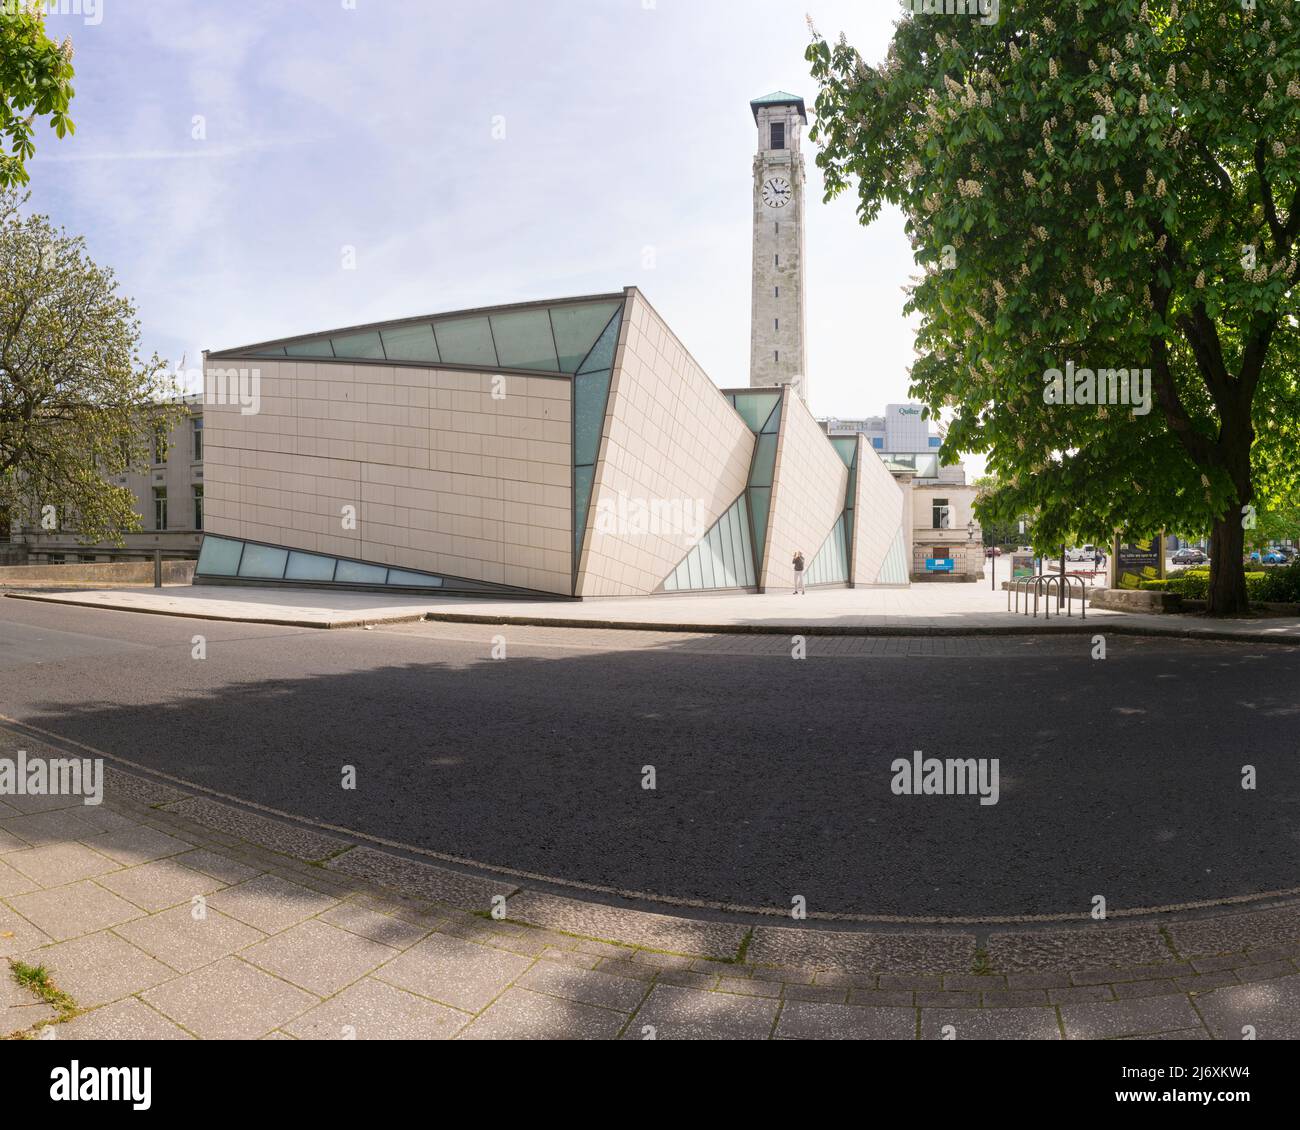 The SeaCity Museum at the Civic Centre in Southampton, England, opened in 2012 on the centenary of RMS Titanic's departure. Stock Photo